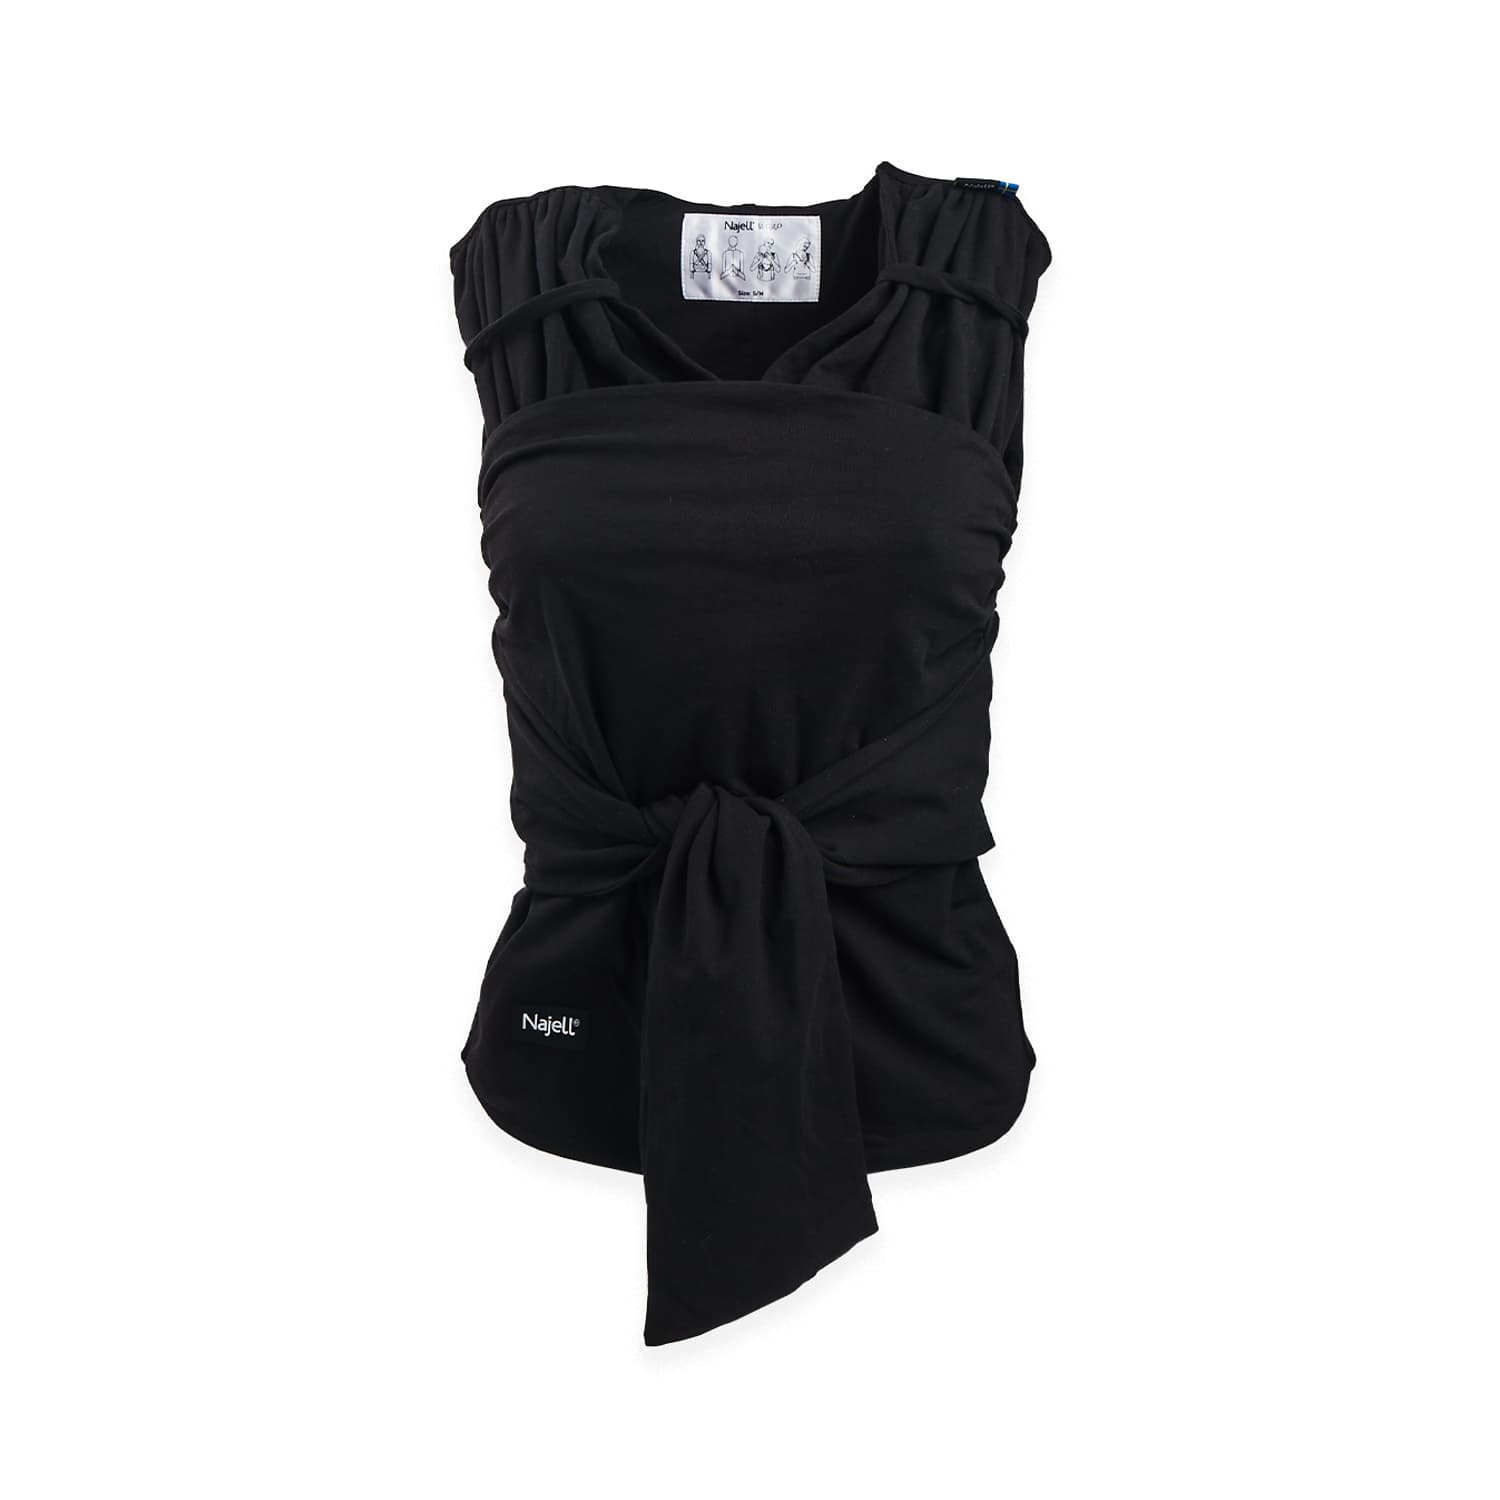 Najell Baby Wrap Carrier (Black)